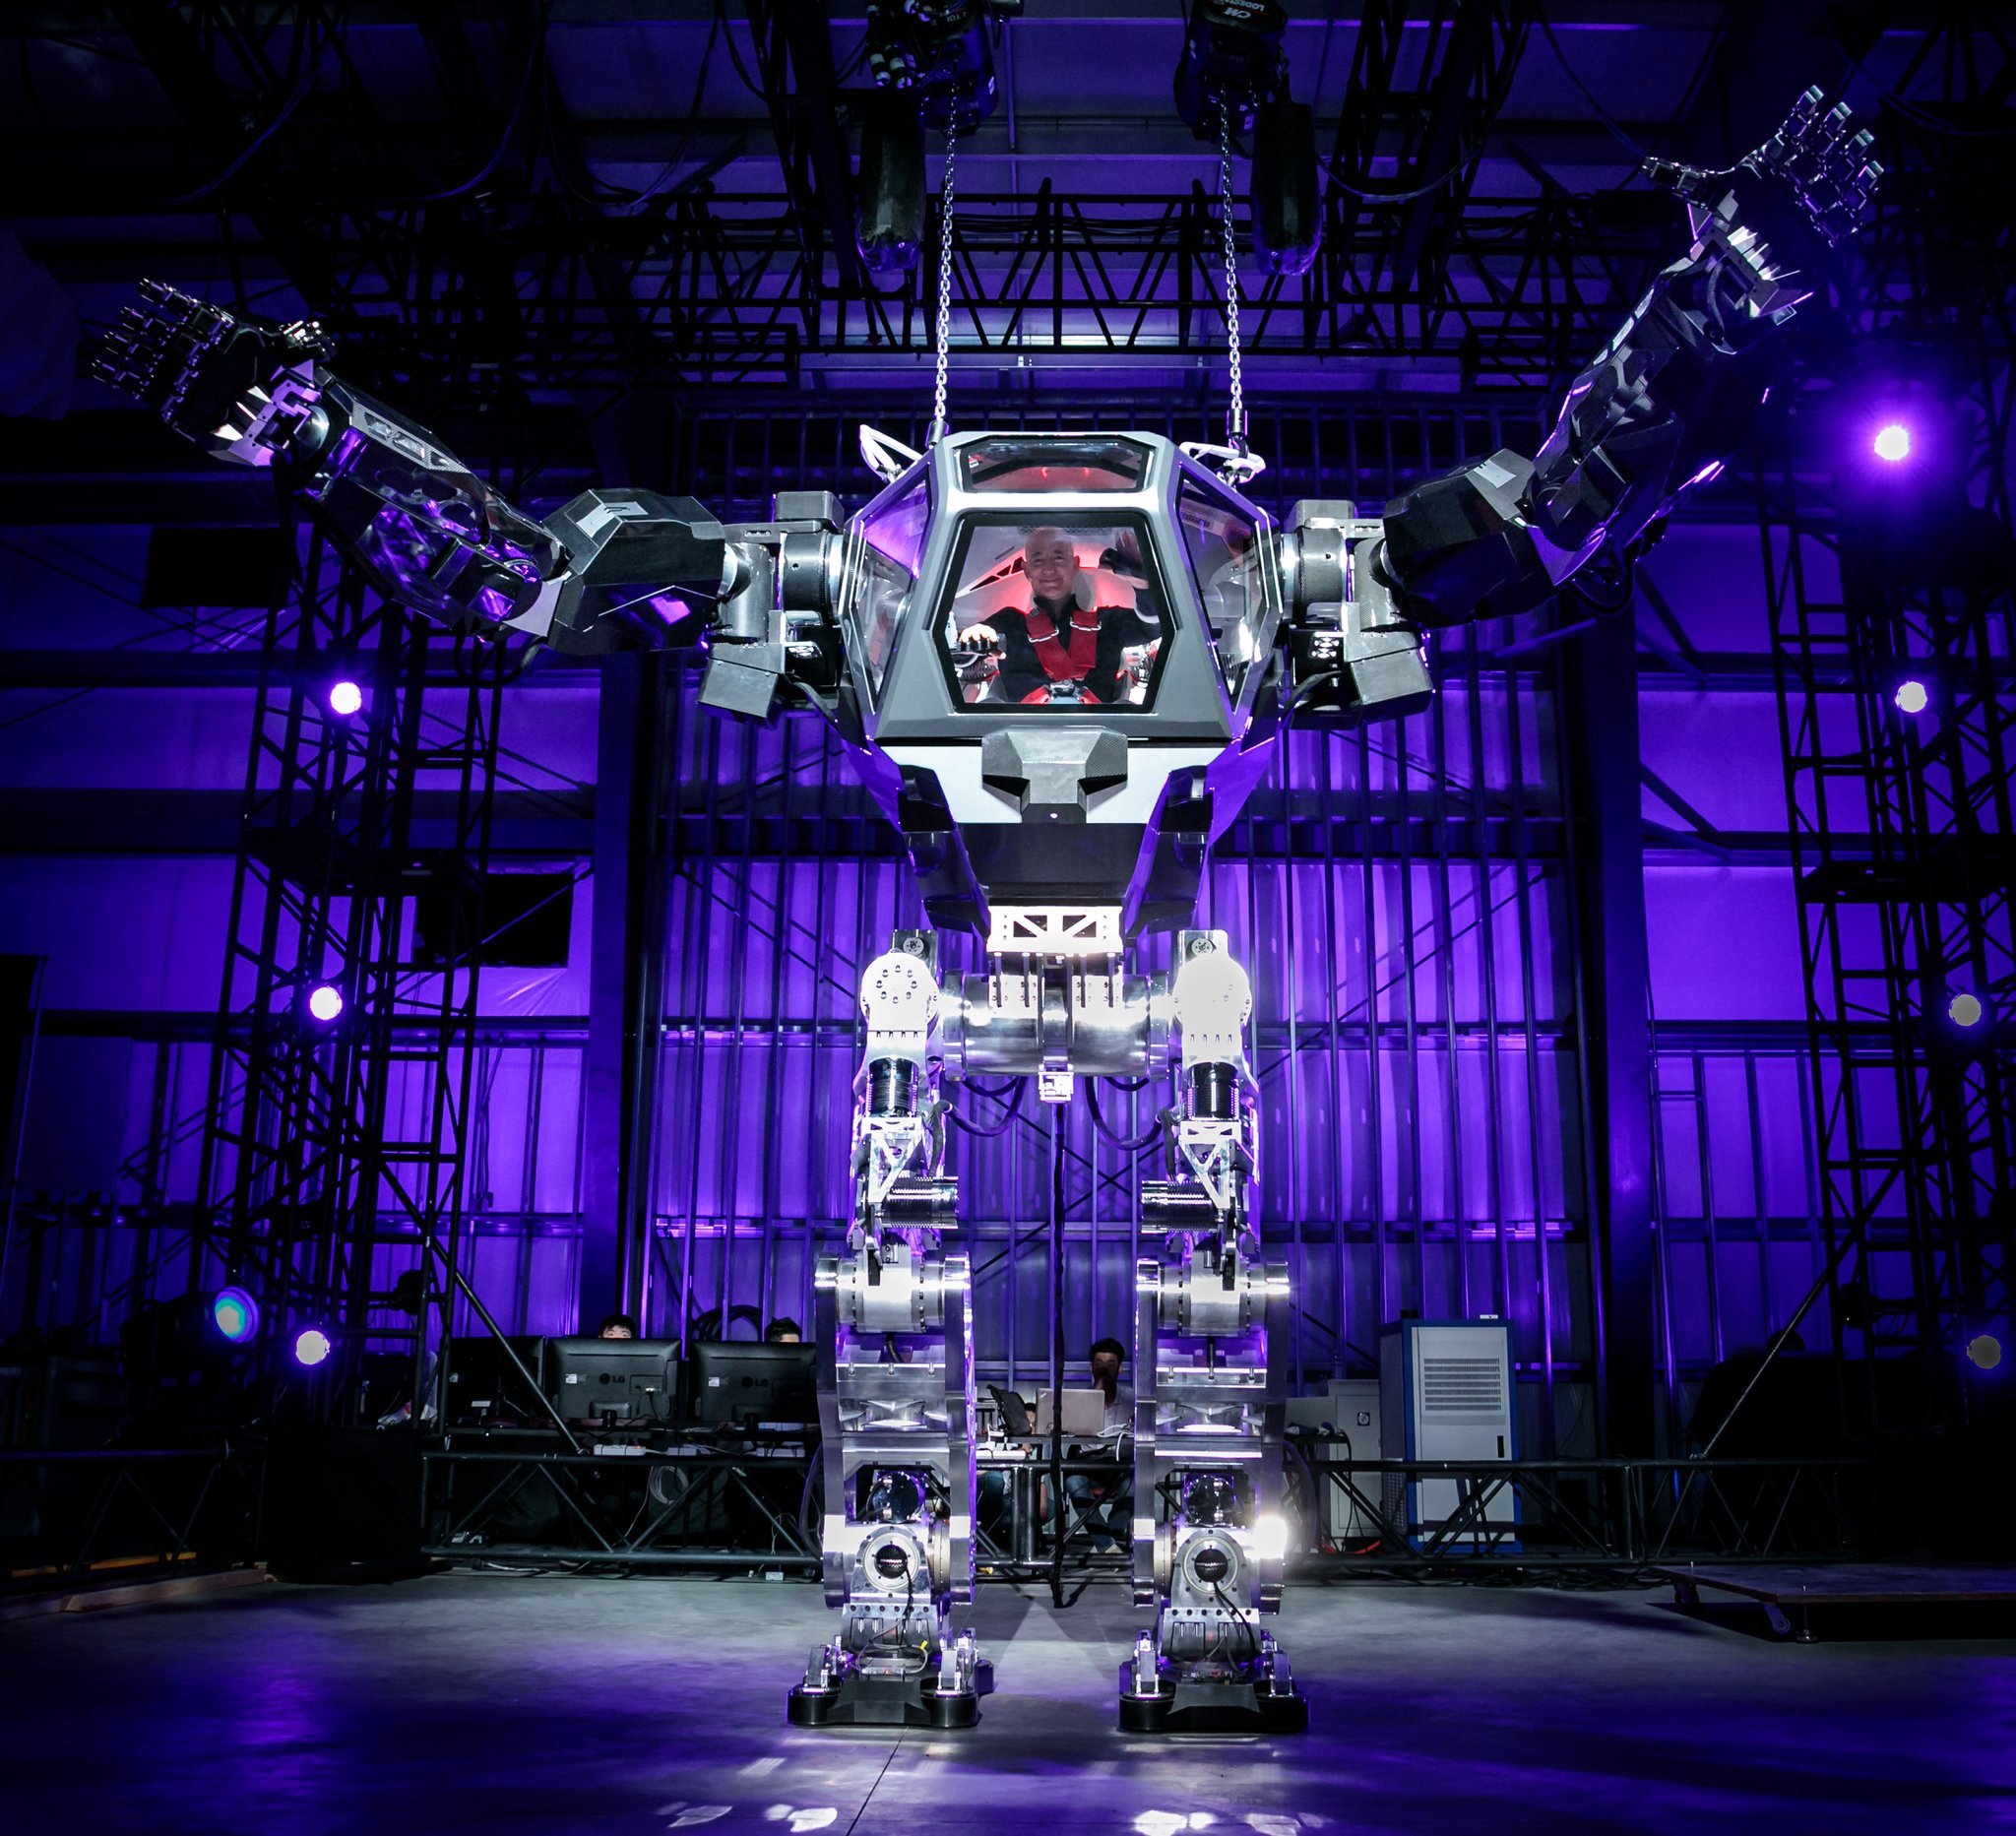 Jeff Bezos Tweets a Picture of Himself Piloting the 13-Foot-Tall Method-2 Robot